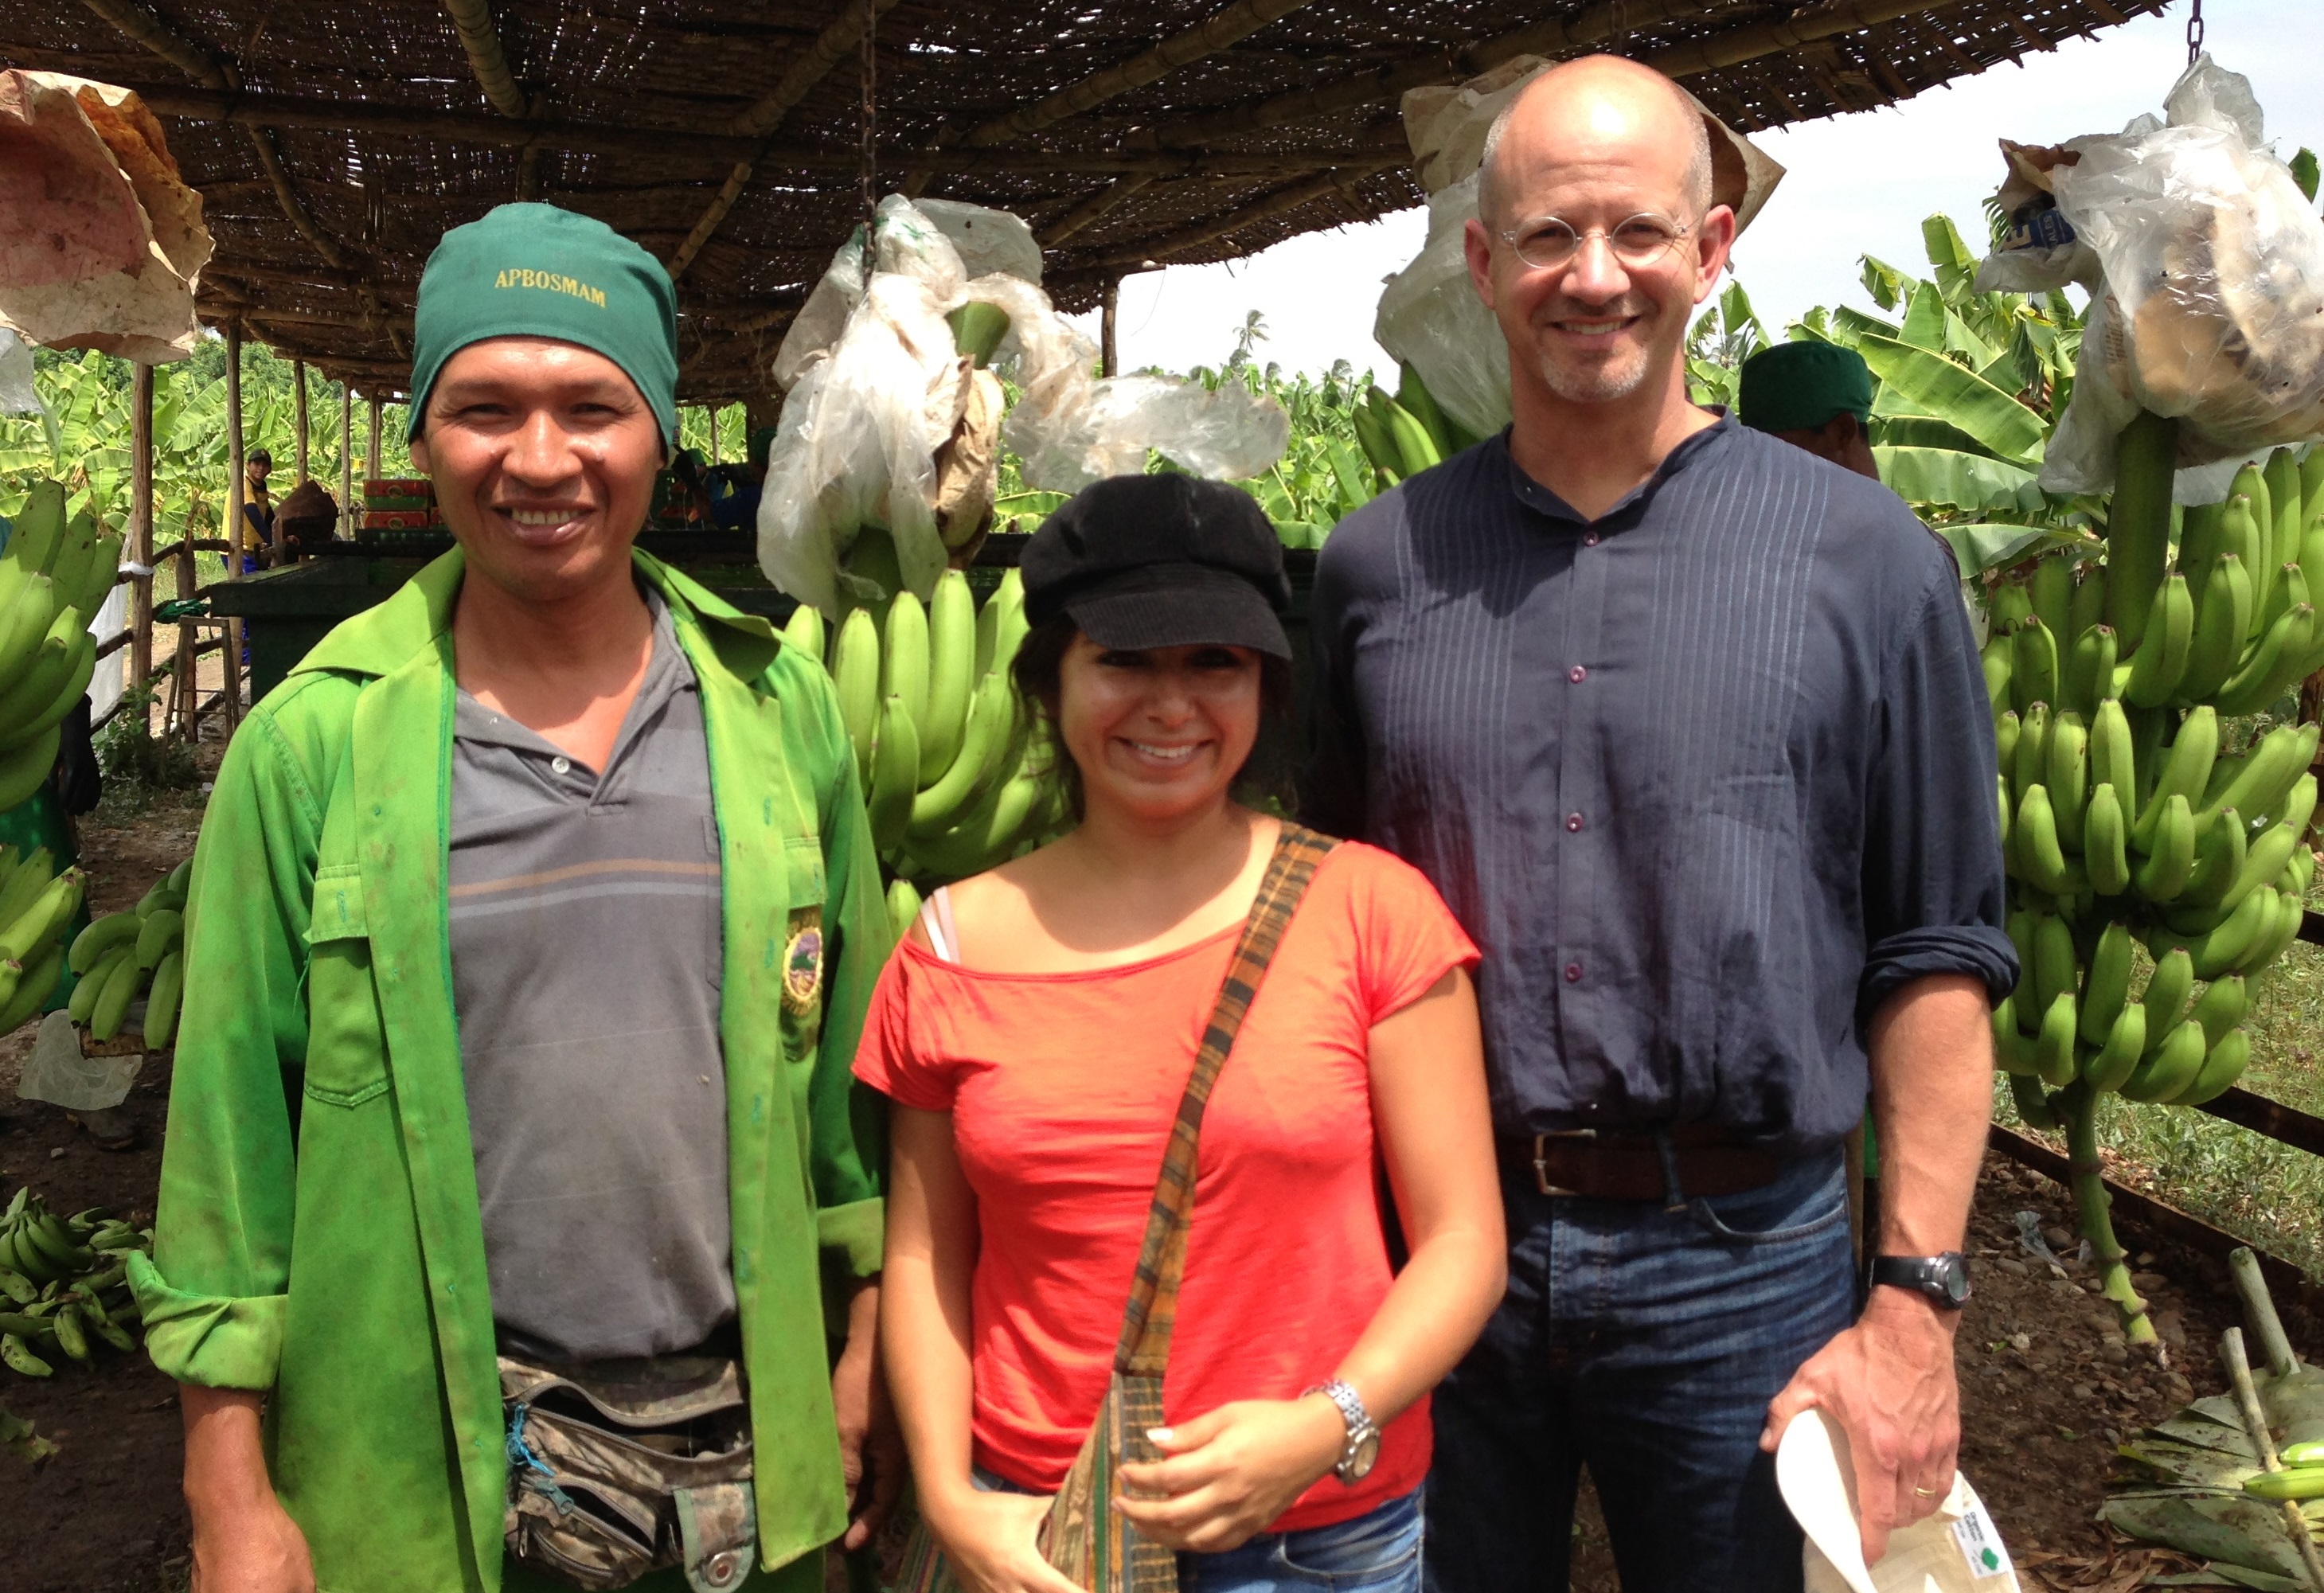 Cecilia Yanez (center) and CEO Willy Foote (right) with Apbosmam banana producer